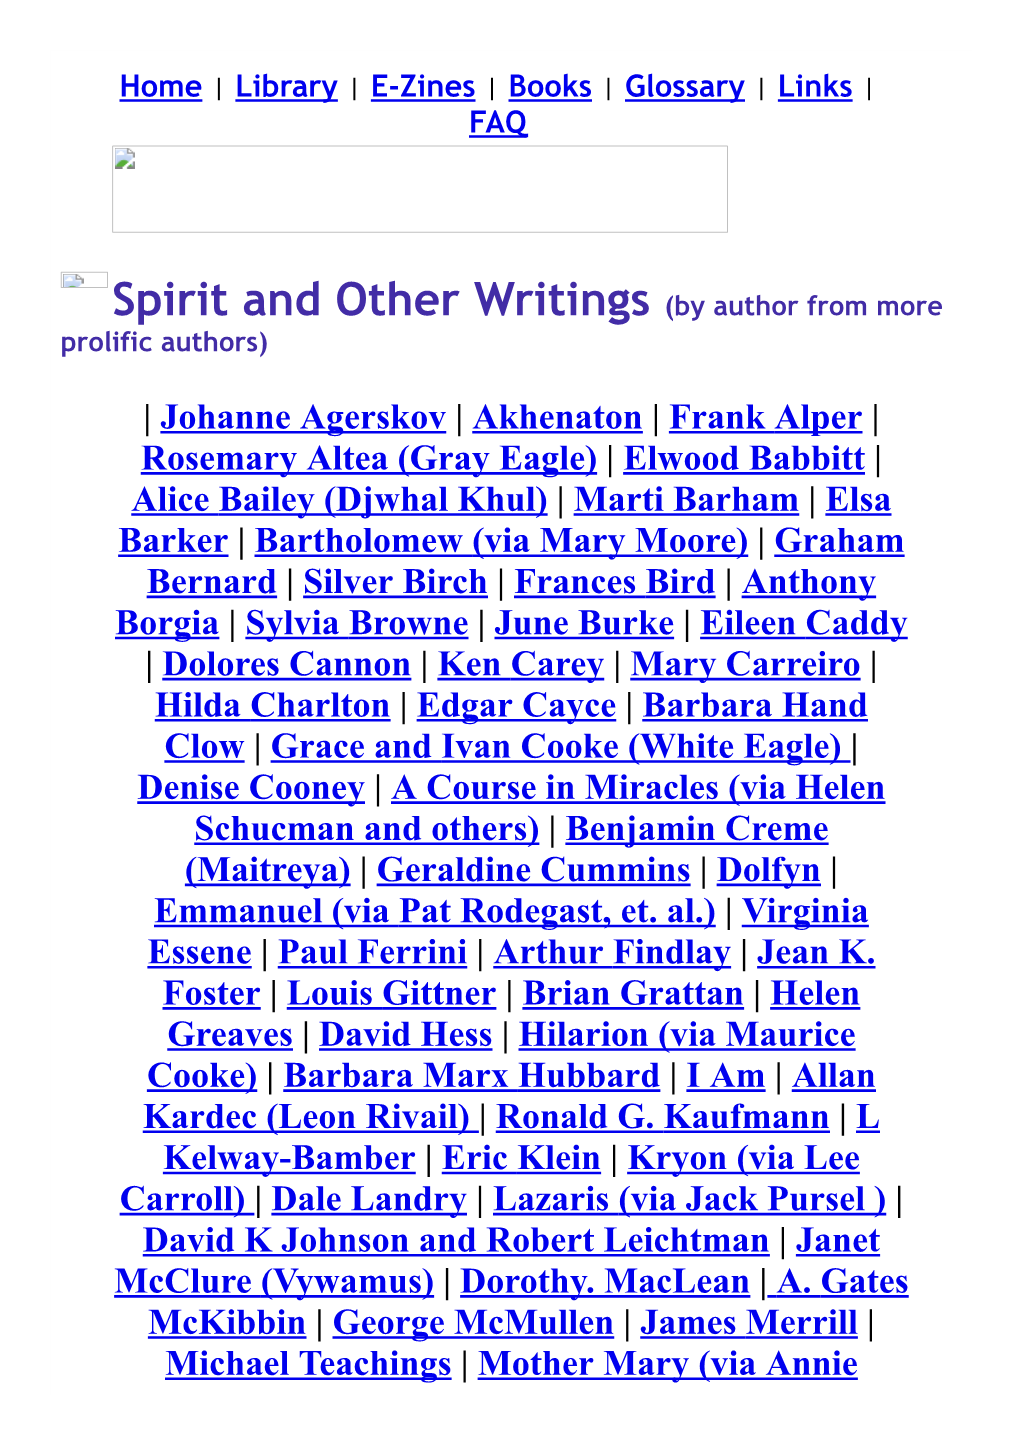 Spirit and Other Writings (By Author from More Prolific Authors)